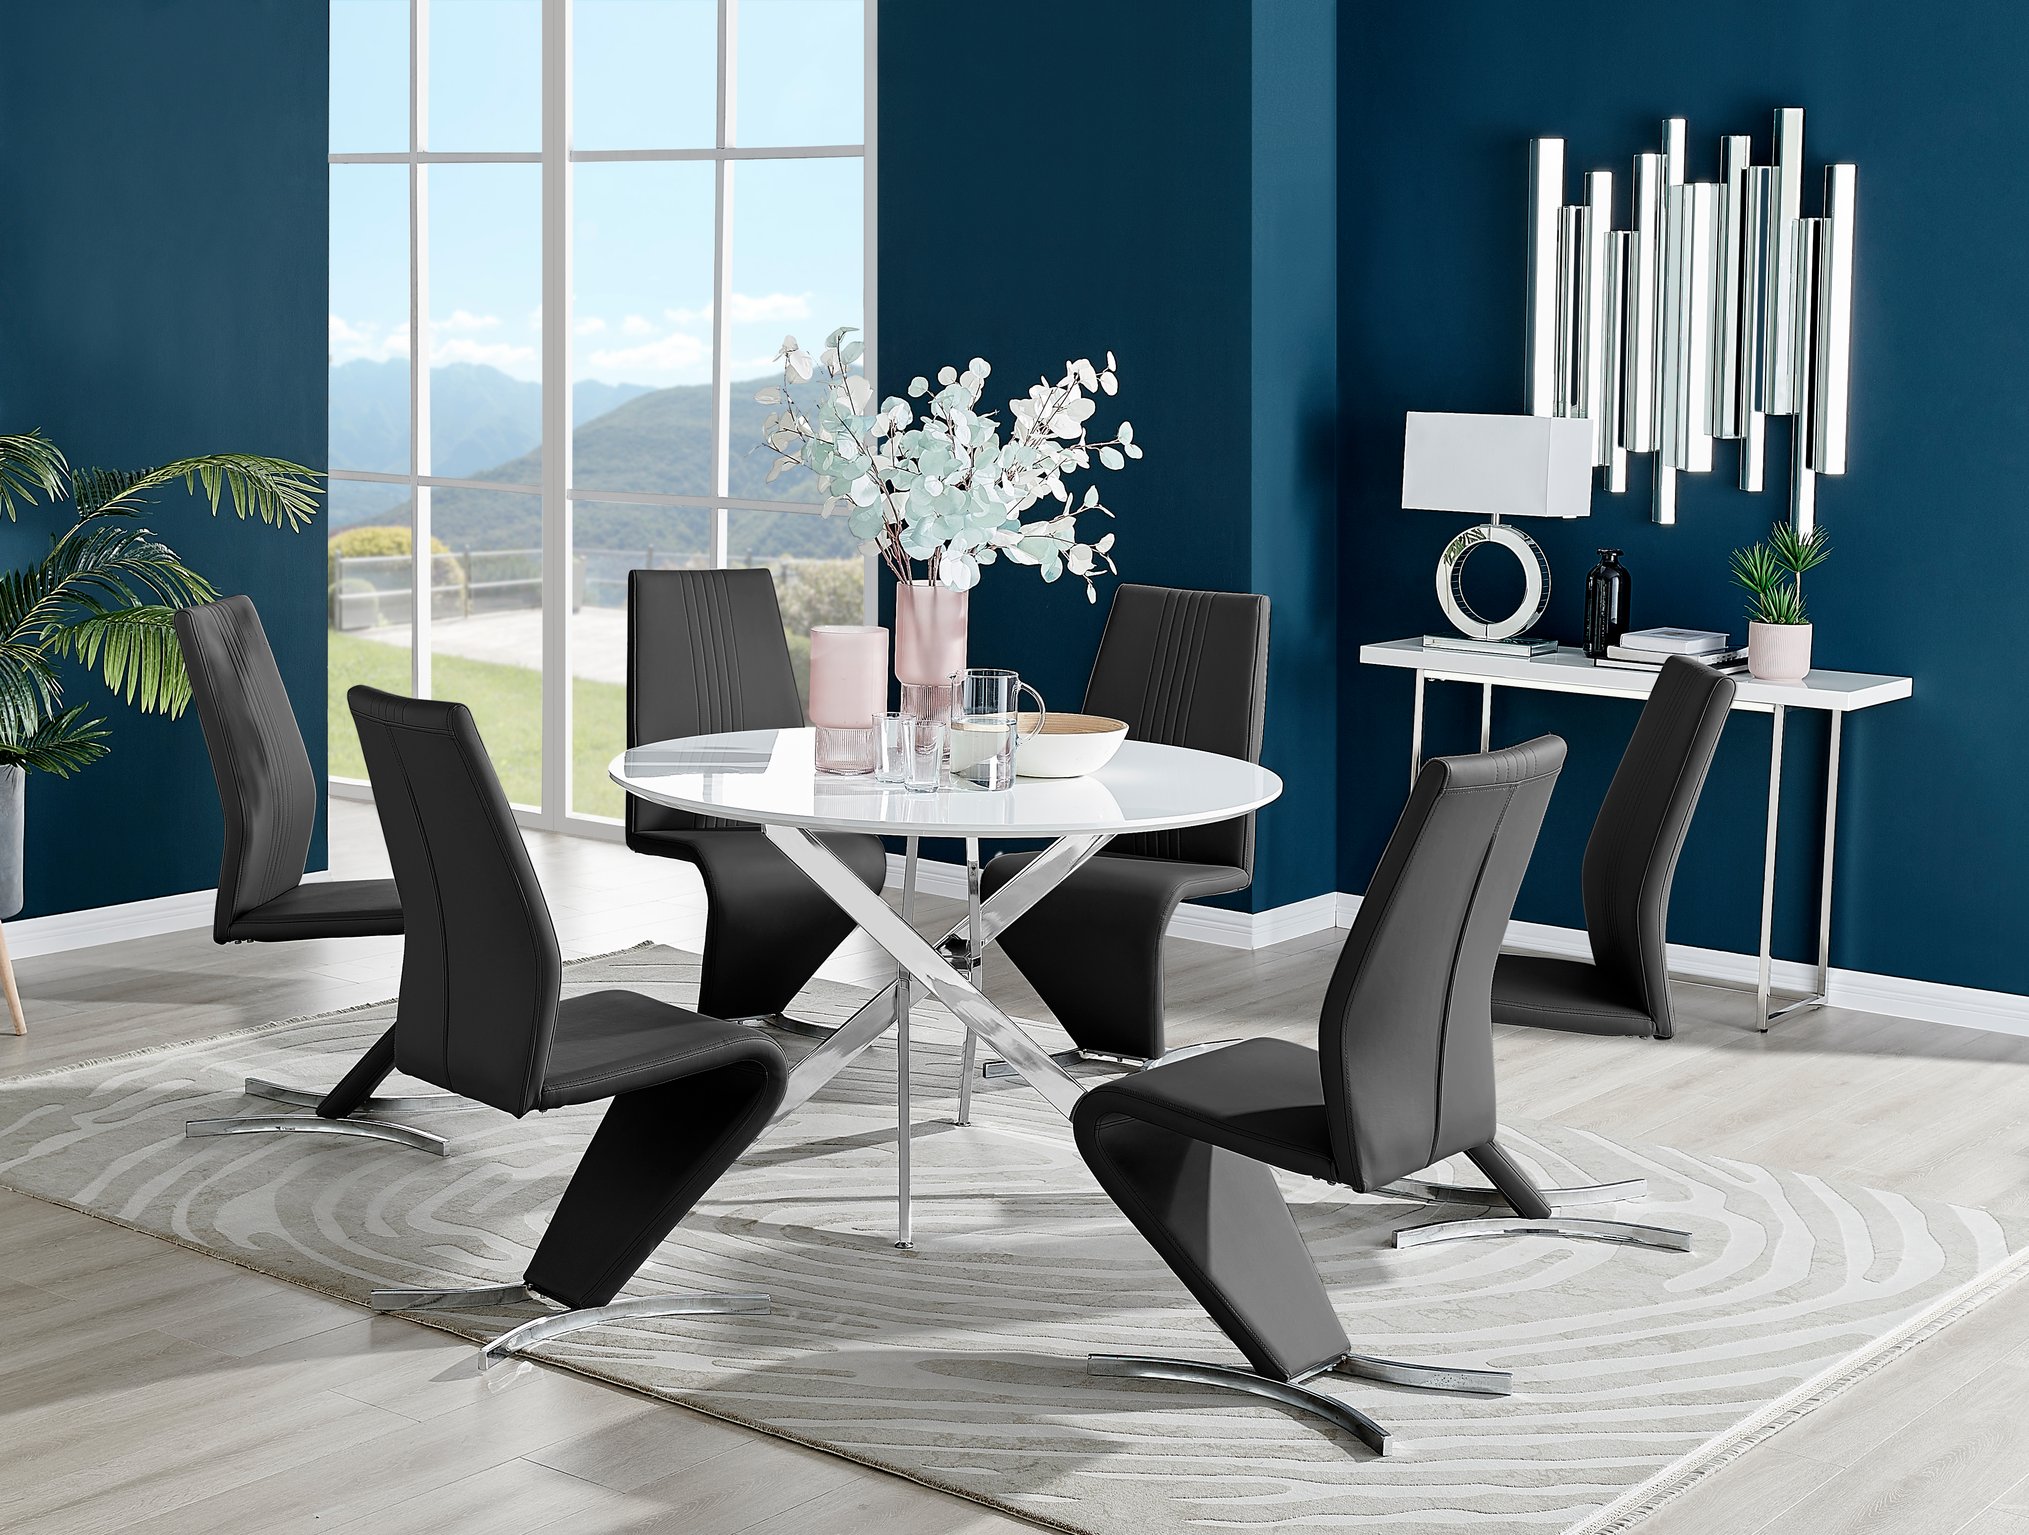 Novara White High Gloss Round Dining Table 120cm & 6 Willow Chairs Furniture Set